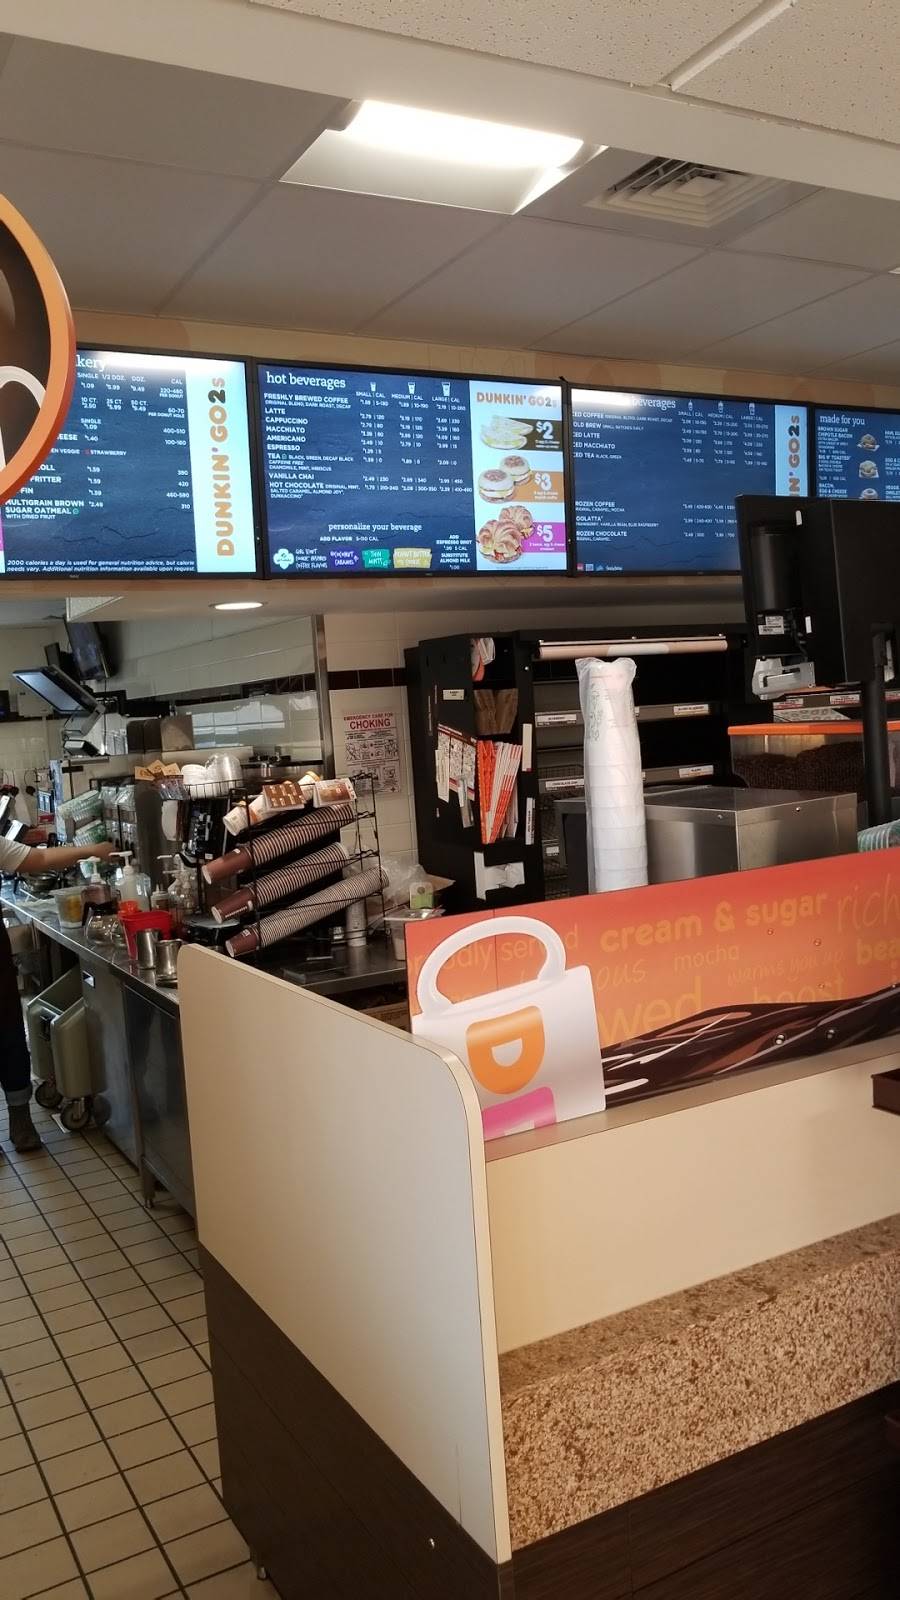 Dunkin Donuts | cafe | 1101 Reisterstown Rd, Pikesville, MD 21208, USA | 4105809009 OR +1 410-580-9009